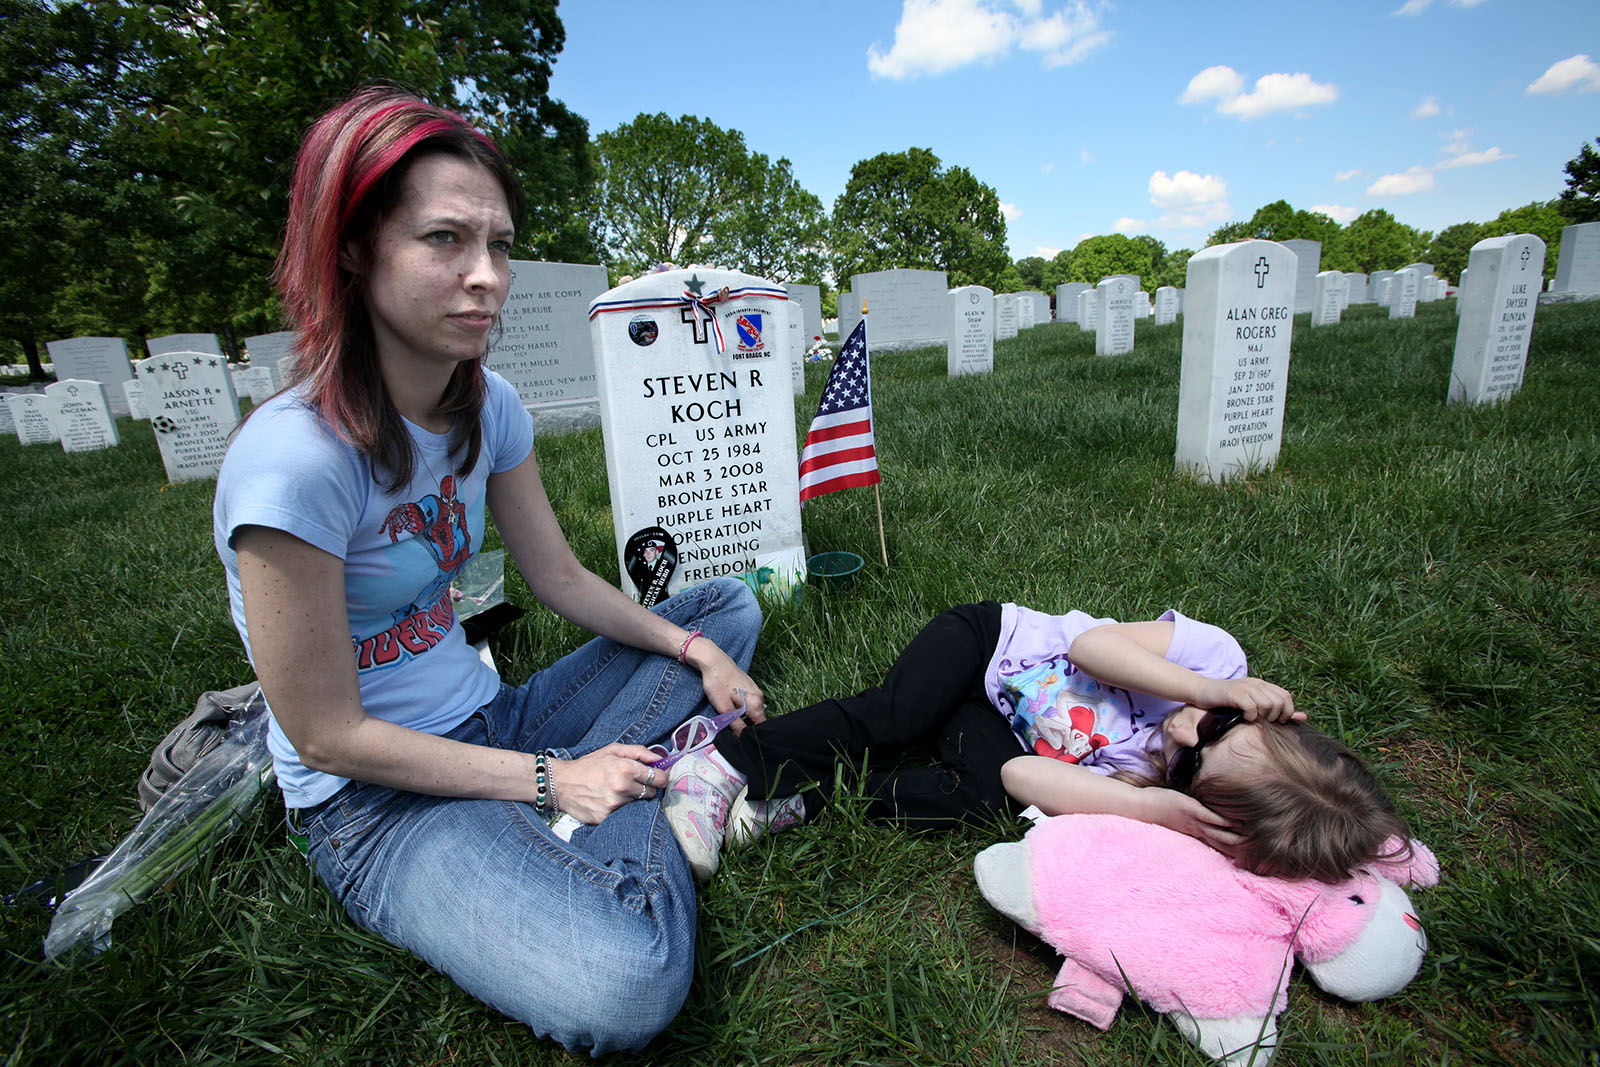 Amy is visiting her husband Steve's grave at Arlington National Cemetery. Their daughter Zoe is with her. He died in Afghanistan in 2008.